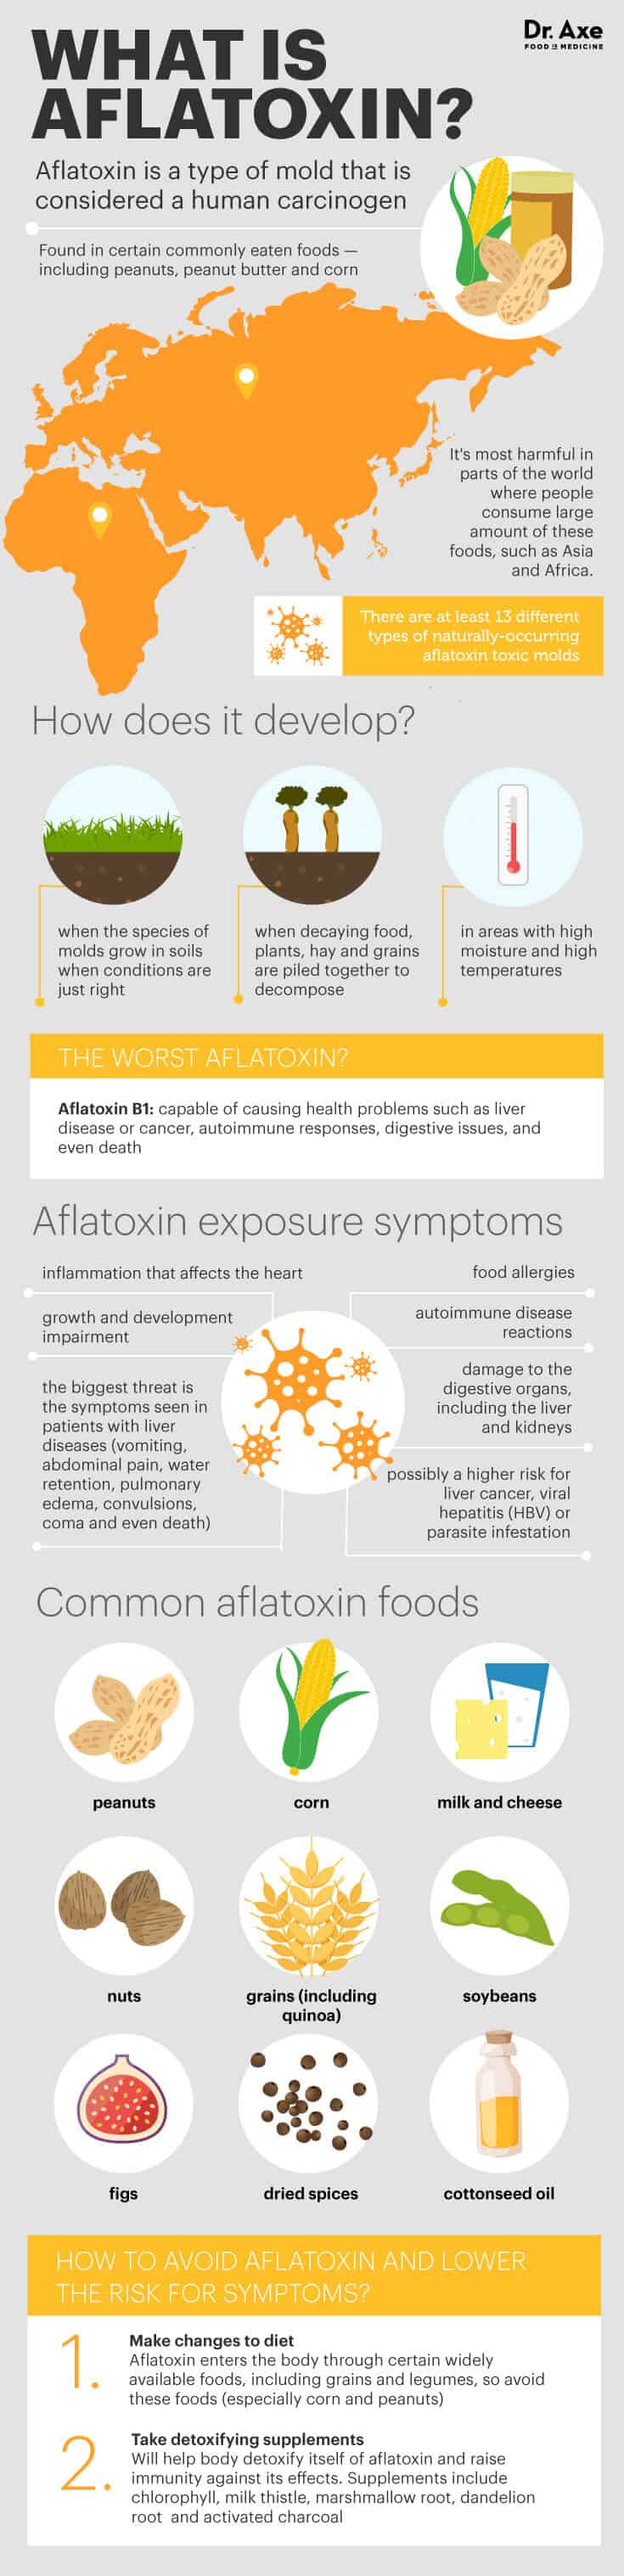 What is aflatoxin - Dr. Axe